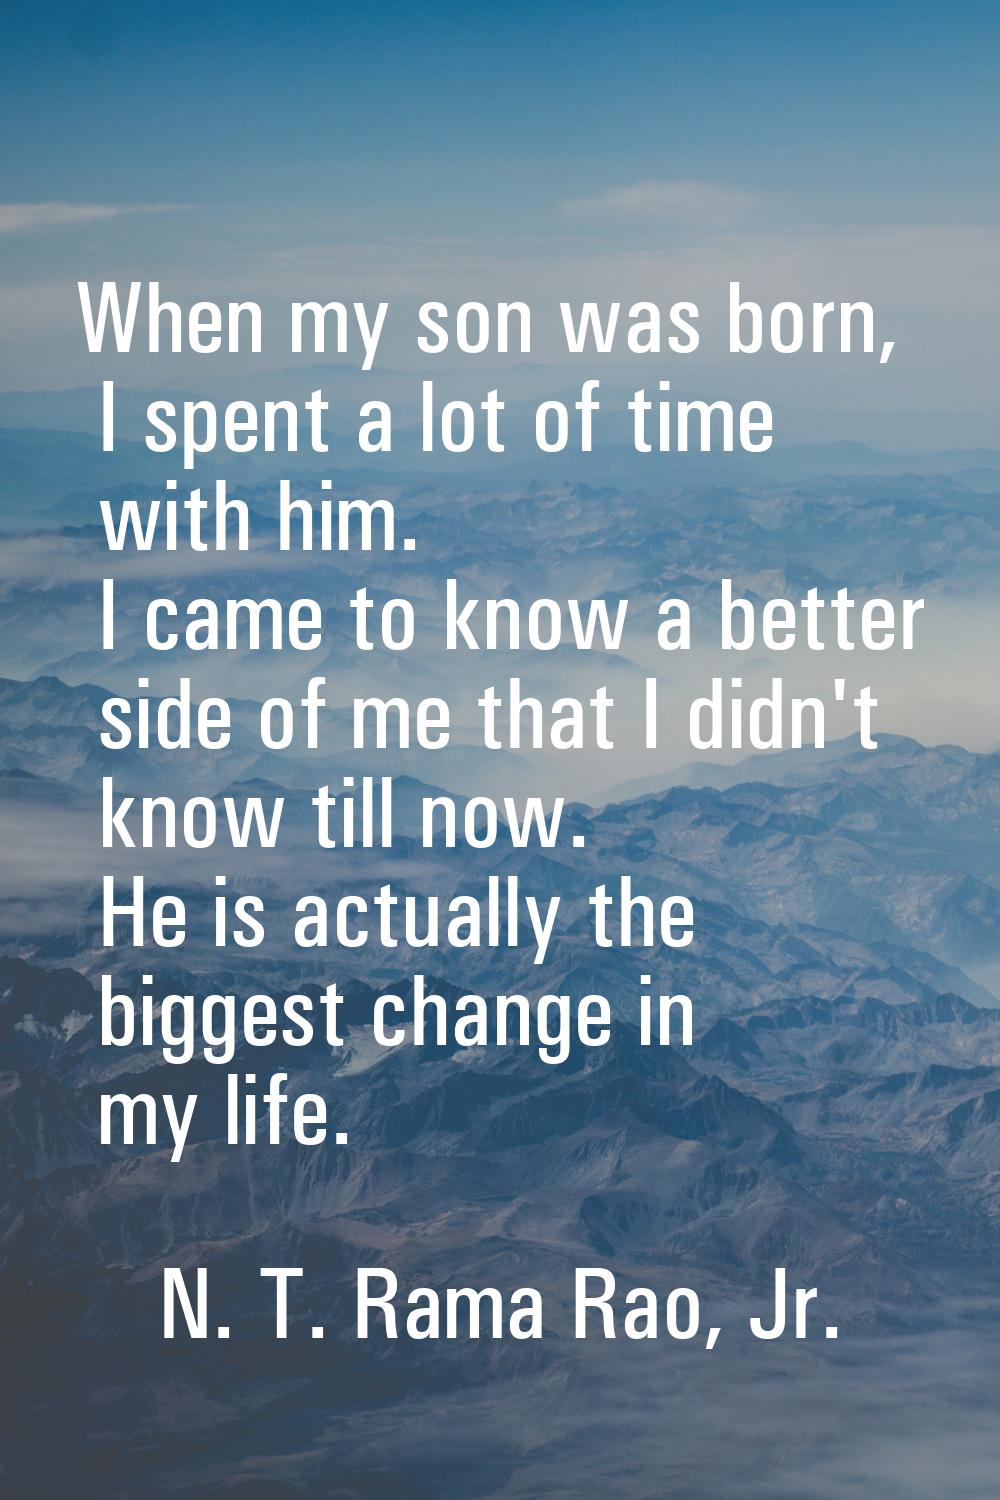 When my son was born, I spent a lot of time with him. I came to know a better side of me that I did